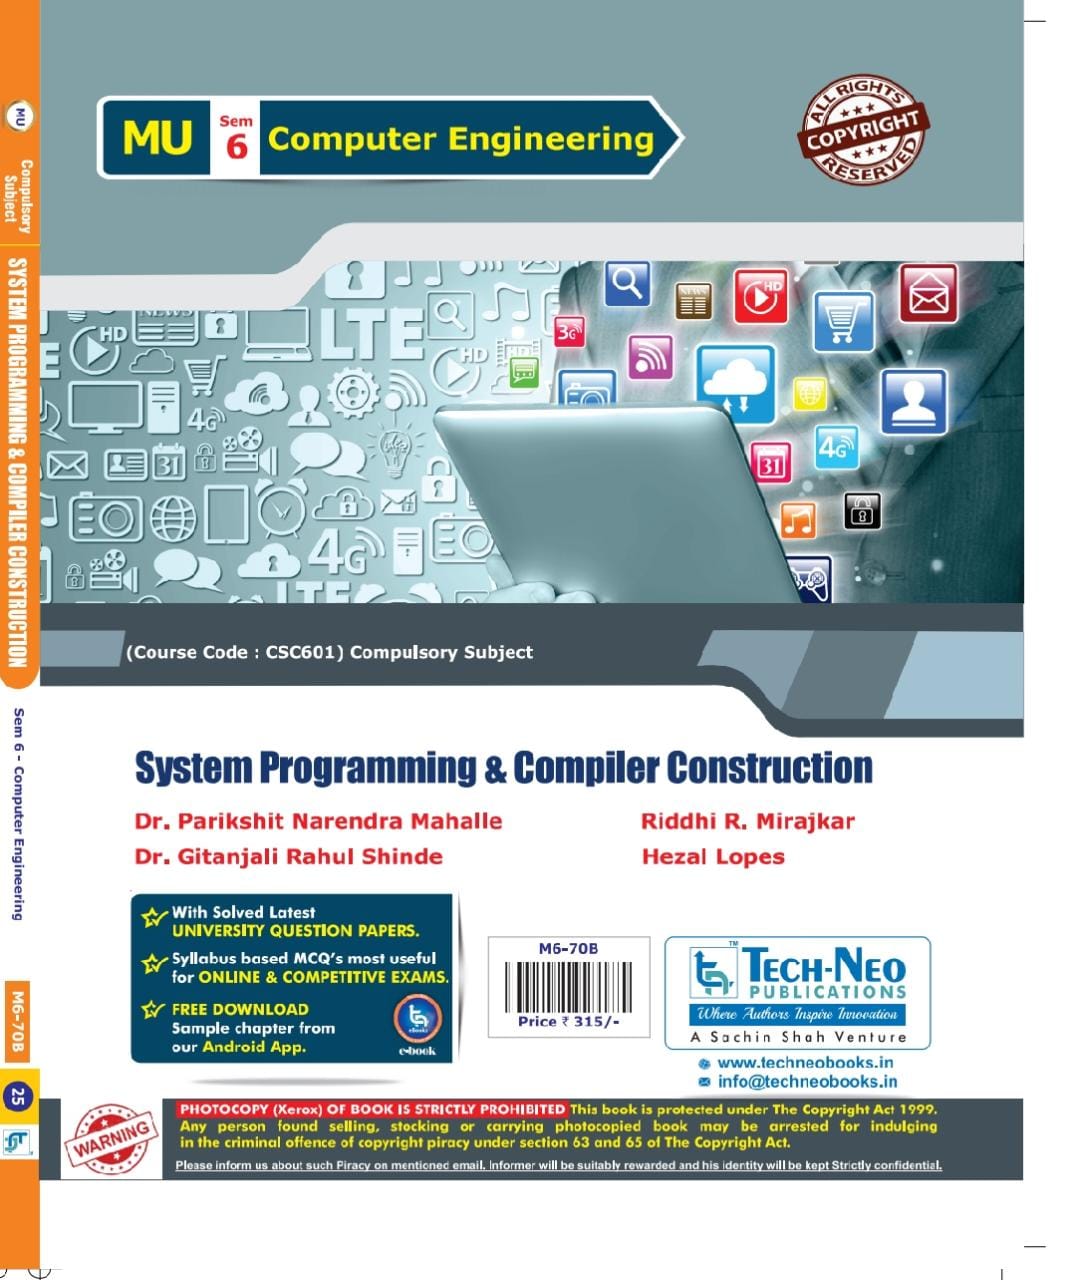 System Programming & Compiler Construction